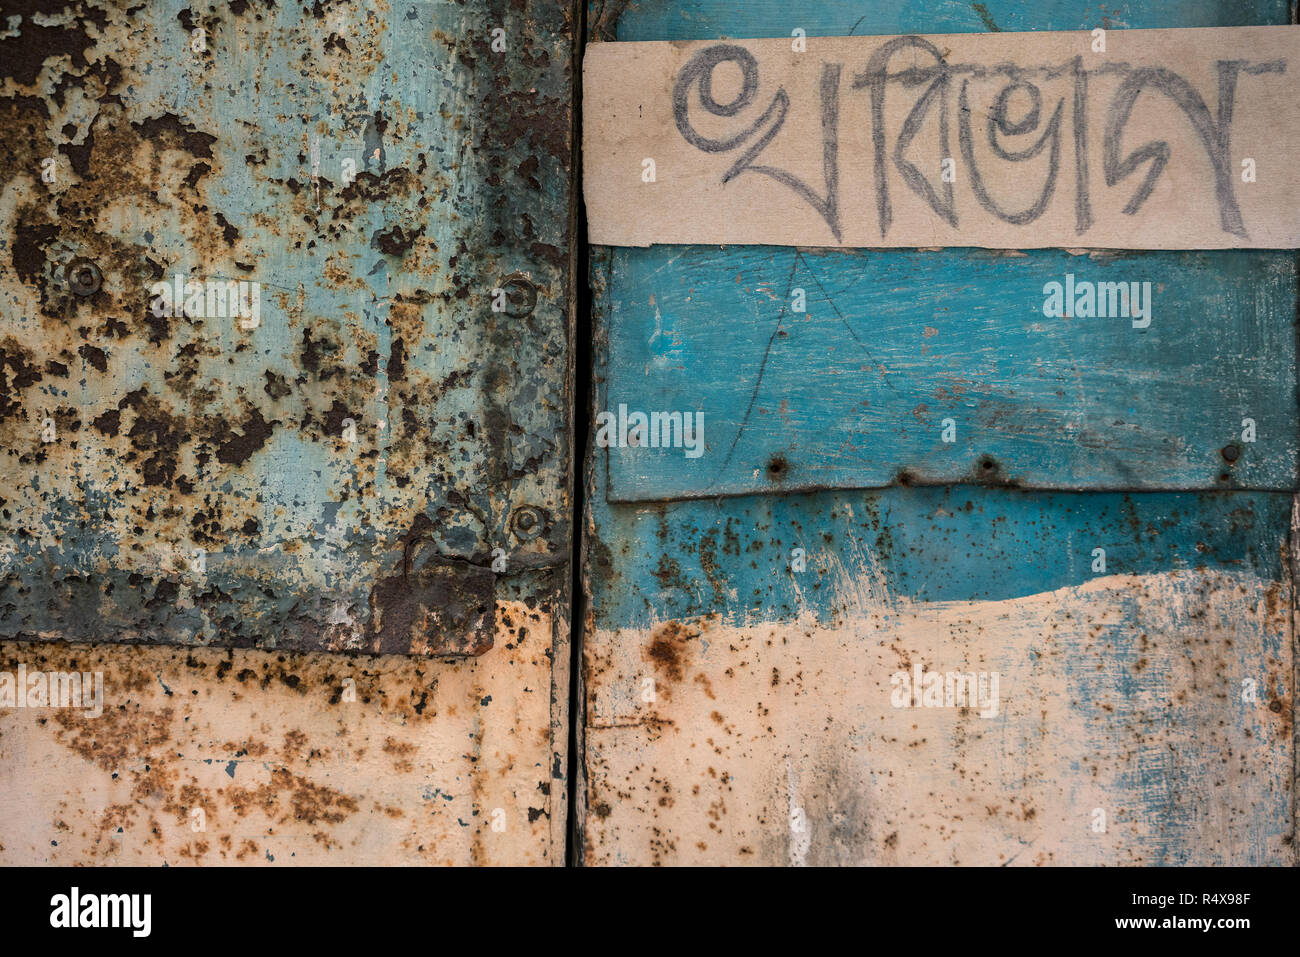 Images of art found in the everyday activities of life while walking the neighborhood lanes of Kolkata, India. Stock Photo